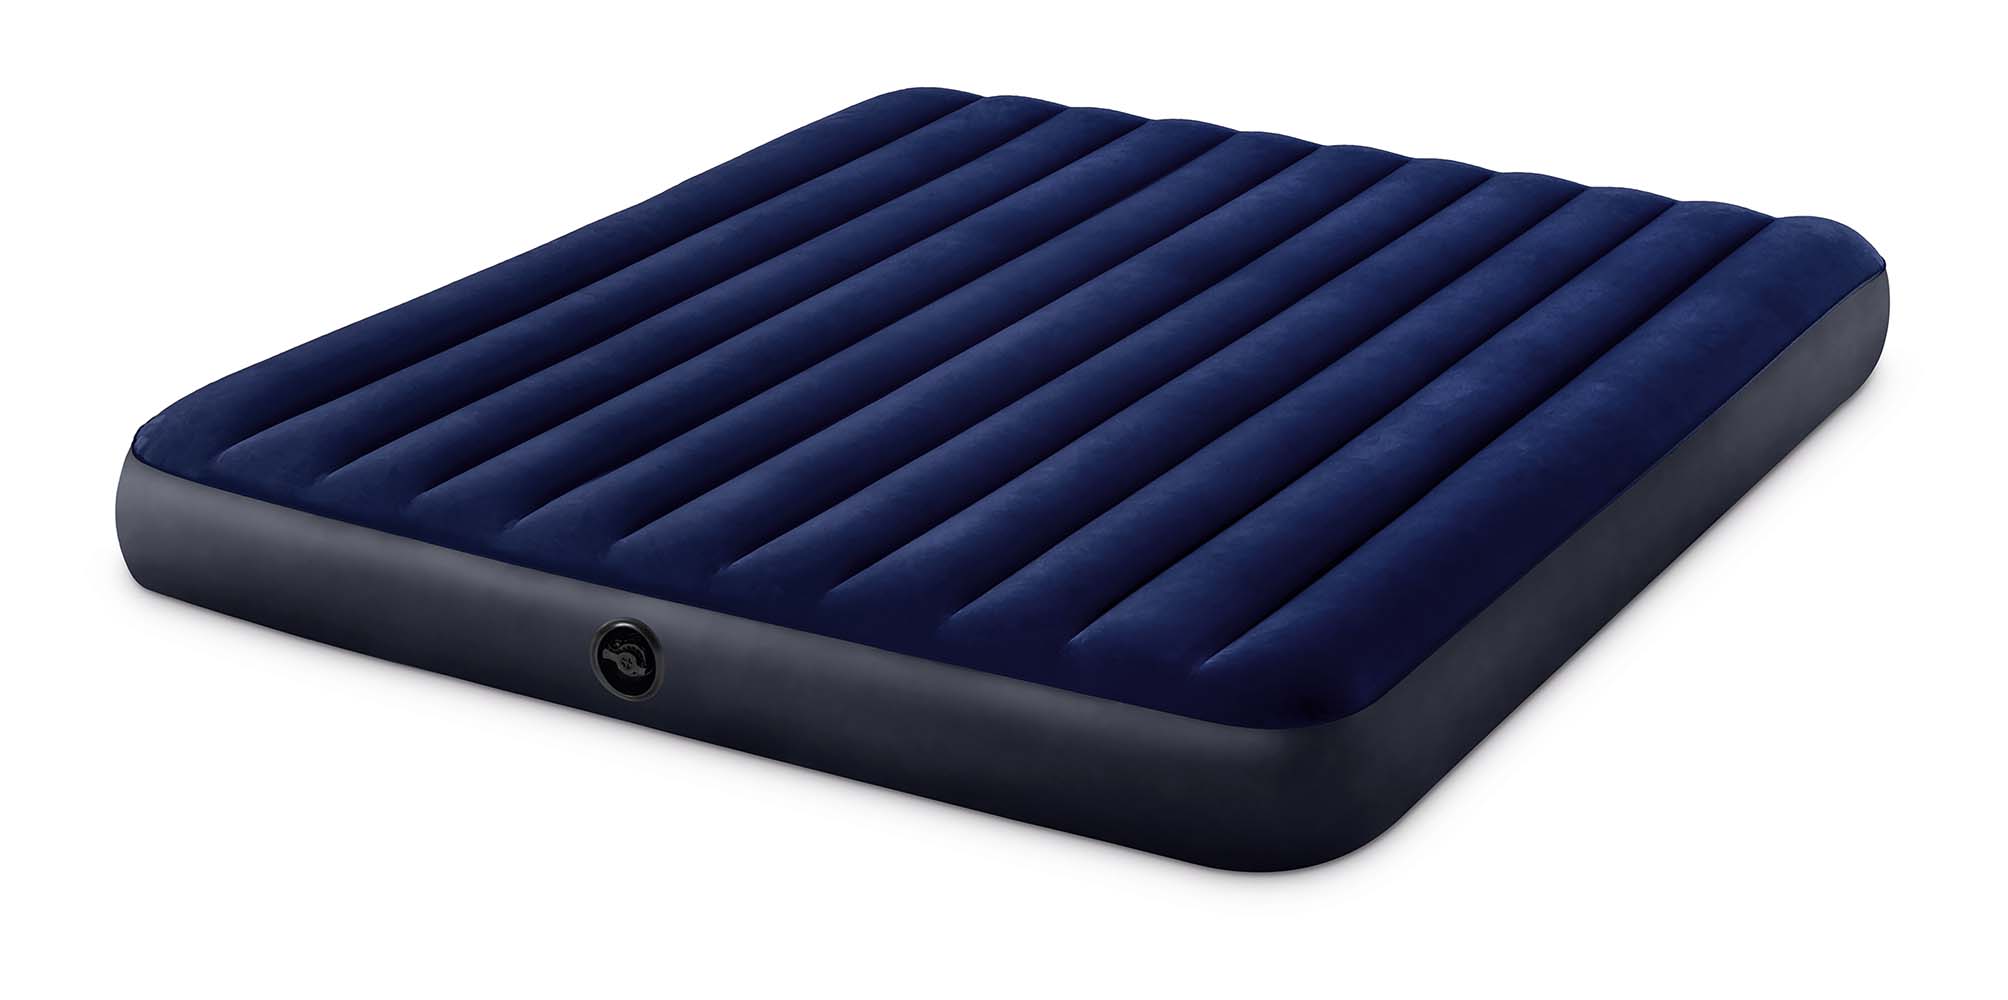 3268755 A wonderfully comfortable inflatable mattress. The inflatable mattress has a flock top layer which makes the mattress incredibly comfortable. This inflatable mattress is ideal for camping or as an extra bed at home. With a 2-in-1 valve for extra rapid inflation and deflation. The inflatable mattress can be compactly folded